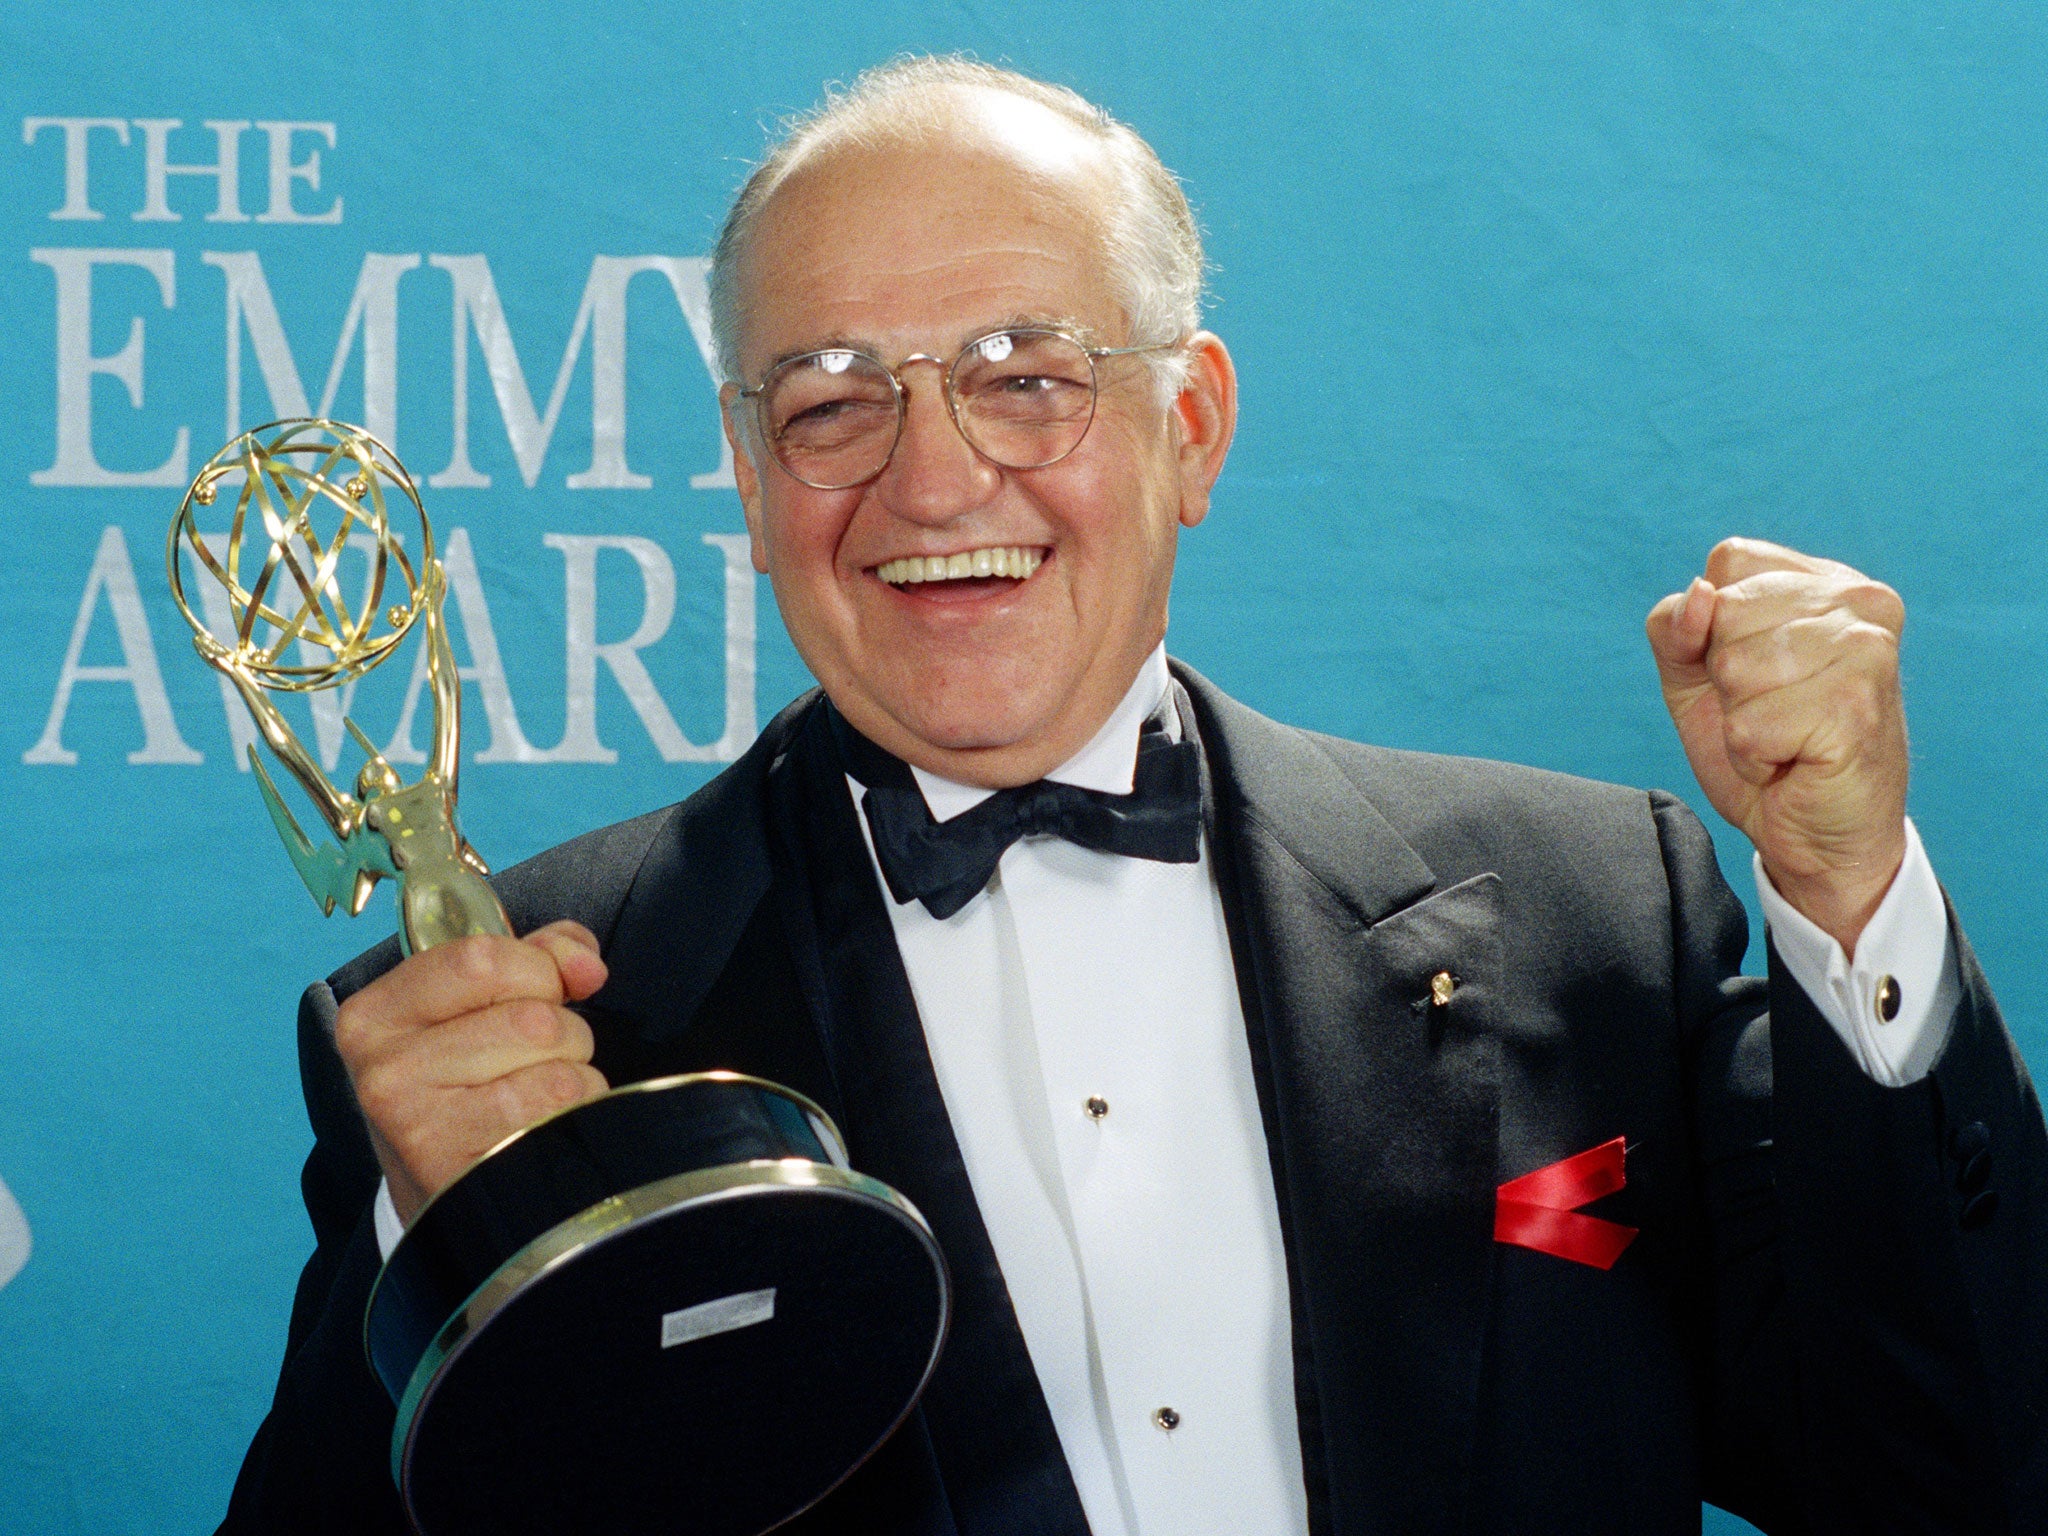 Richard Dysart grasps the Emmy Award he won for Best Supporting Actor in a Drama Series for his role in L.A. Law during the 44th annual Emmy Awards in Pasadena